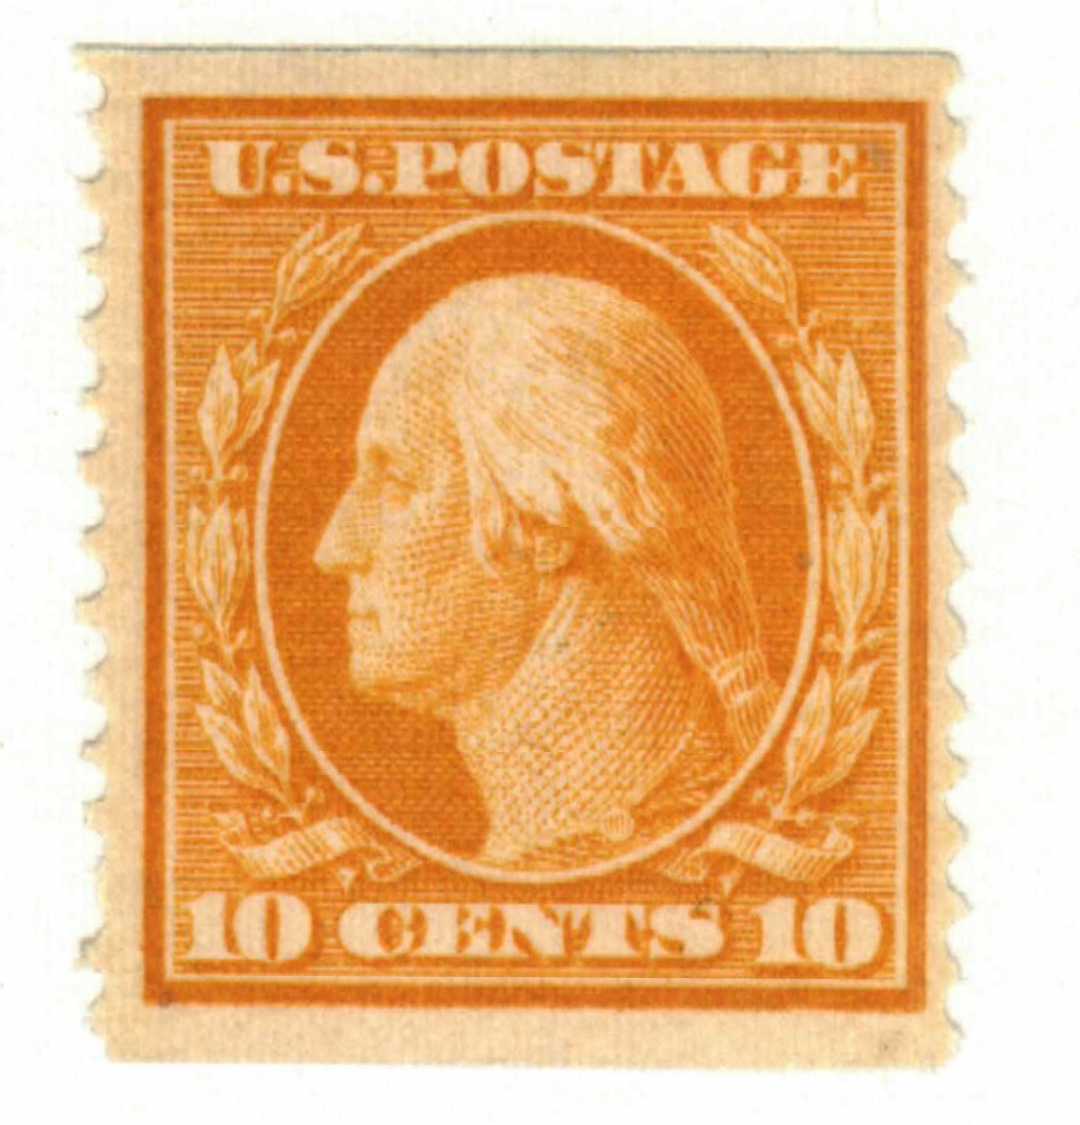 352-56 - Compete Set, 1909 Coil Stamps Perforated Vertically